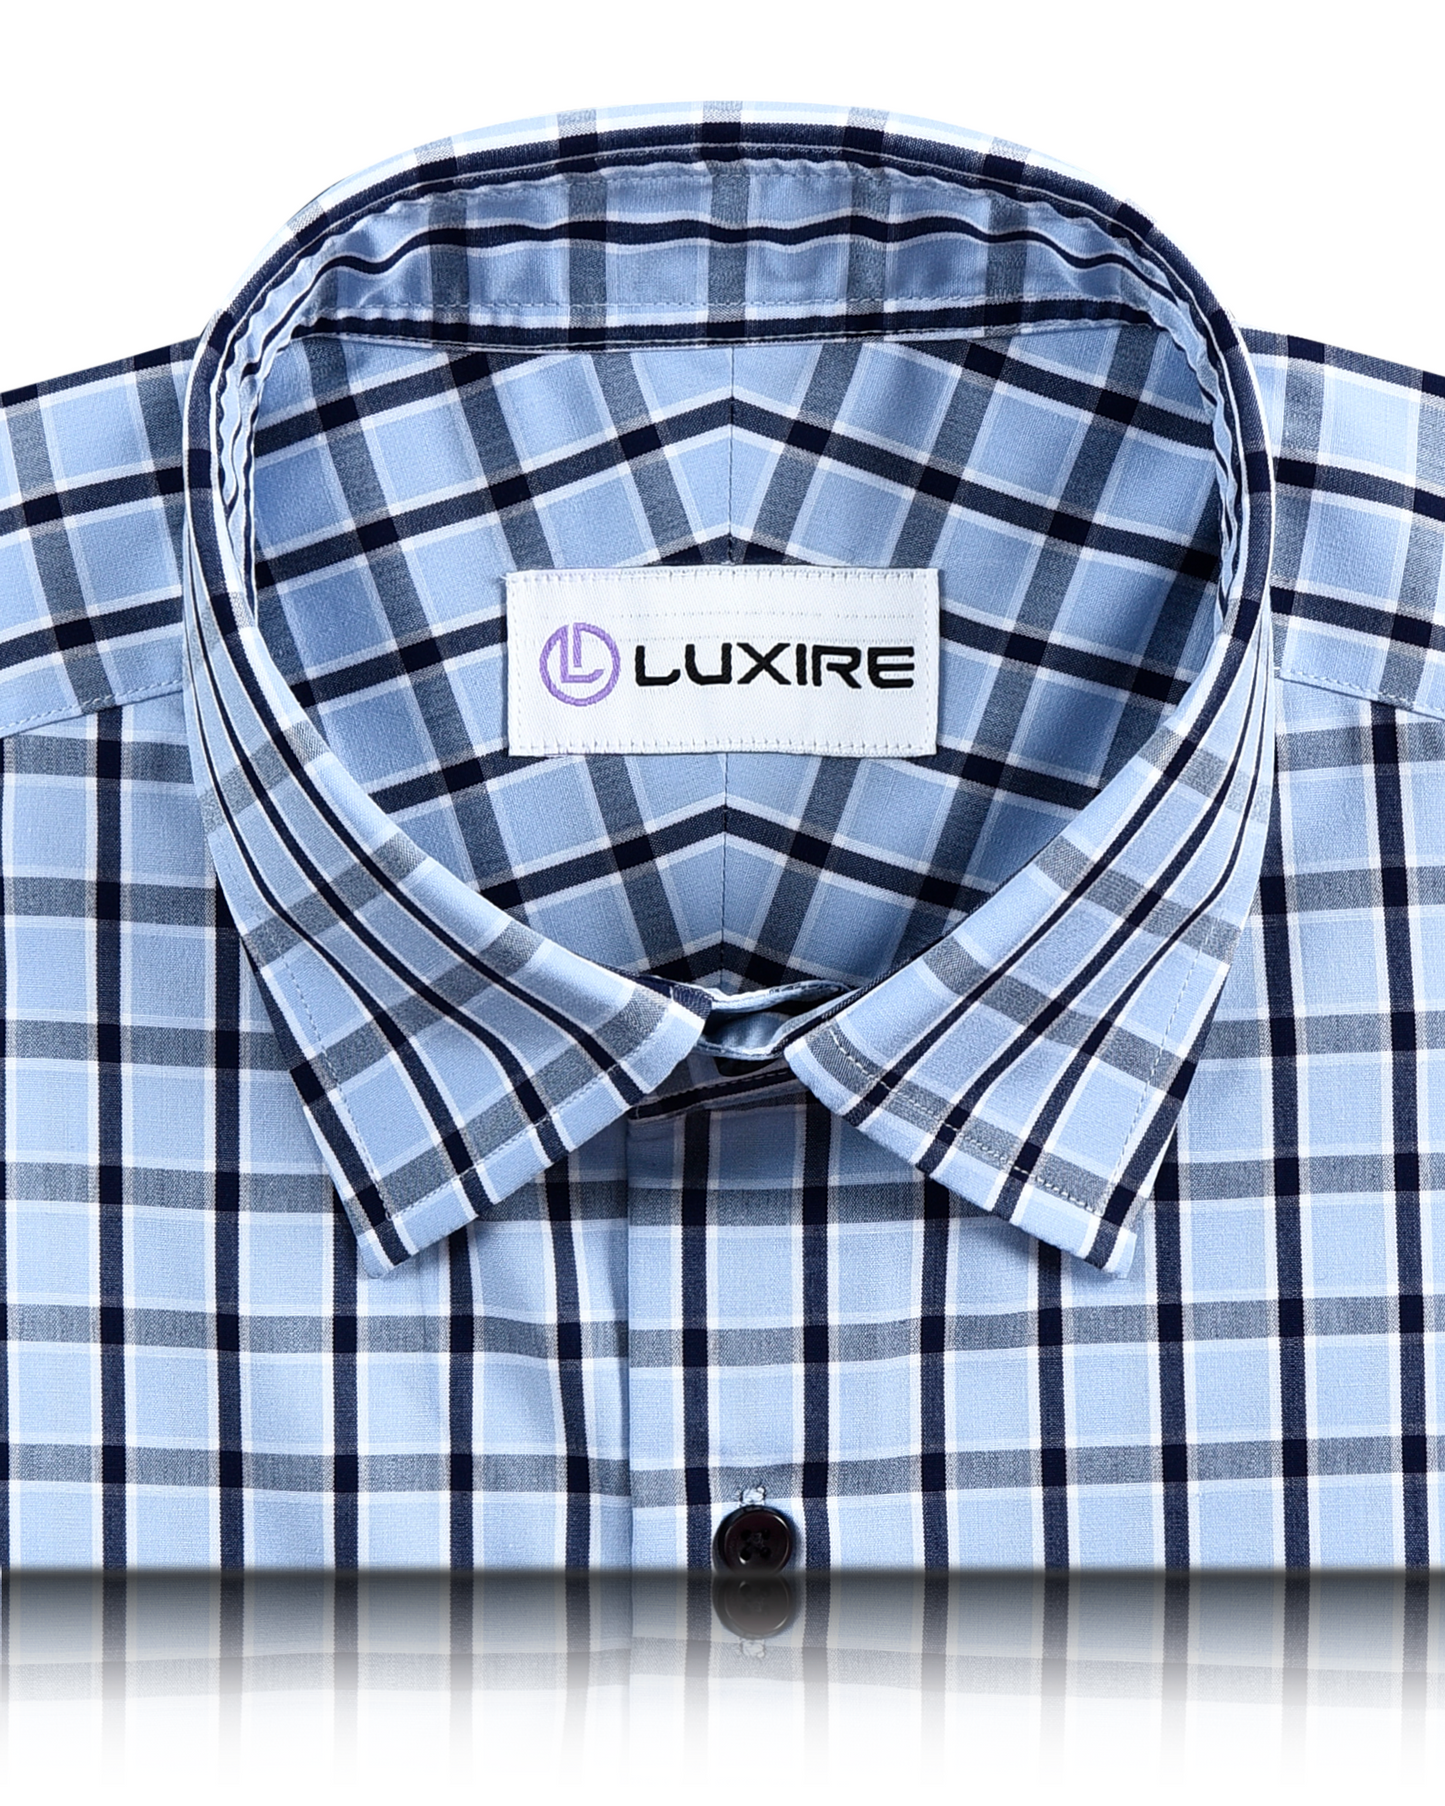 Front close view of custom check shirts for men by Luxire blue navy checks